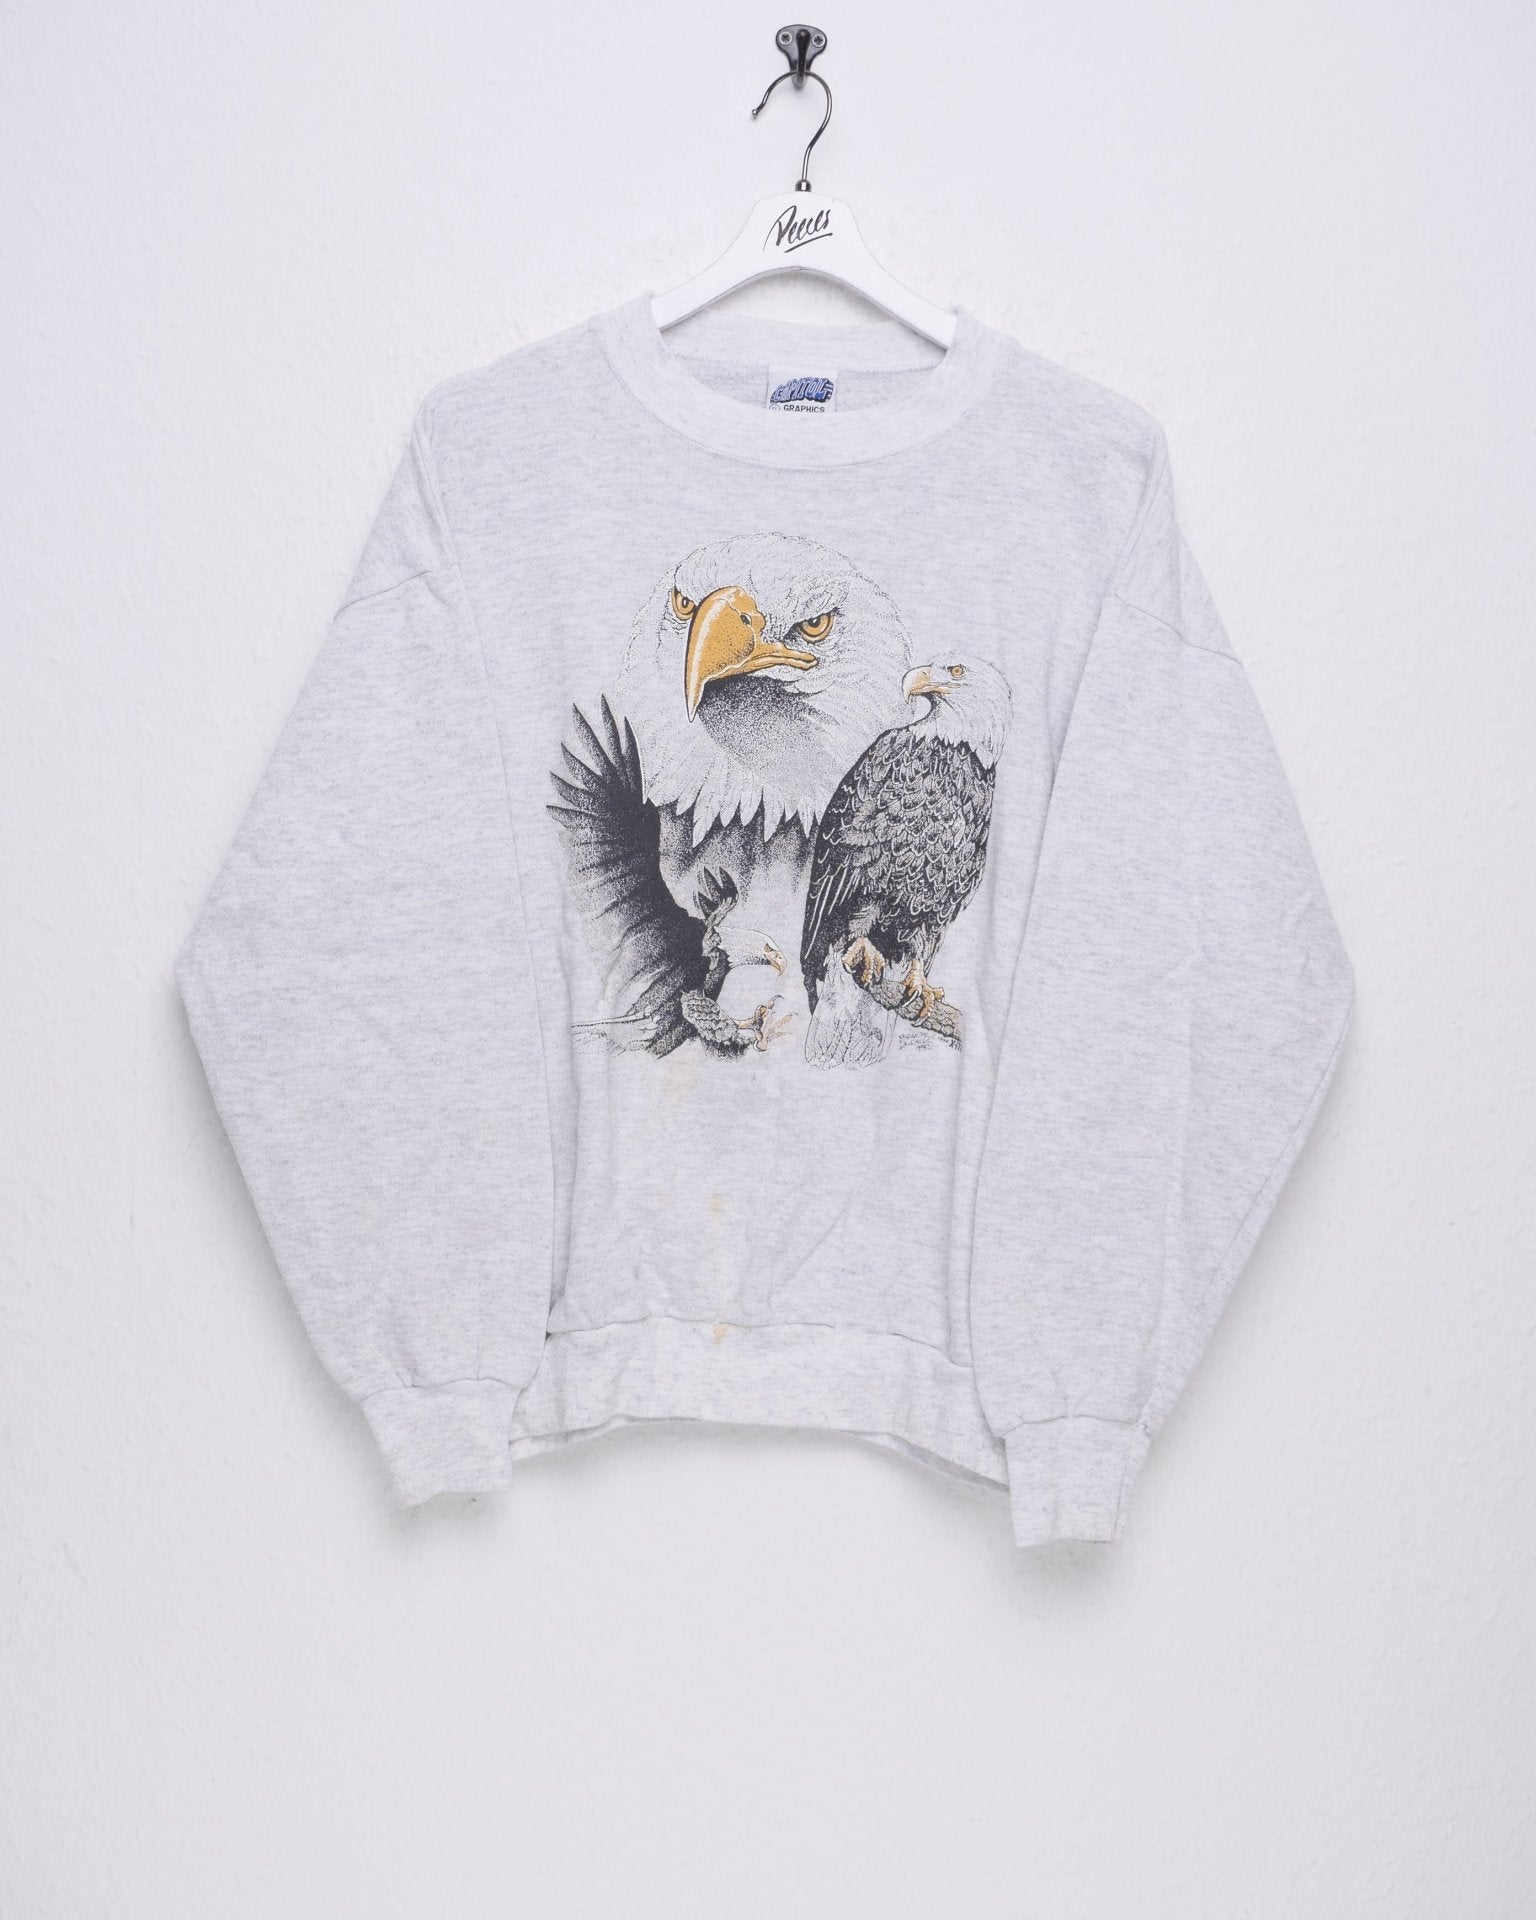 Bald Eagle printed Graphic 1991 Vintage Sweater - Peeces